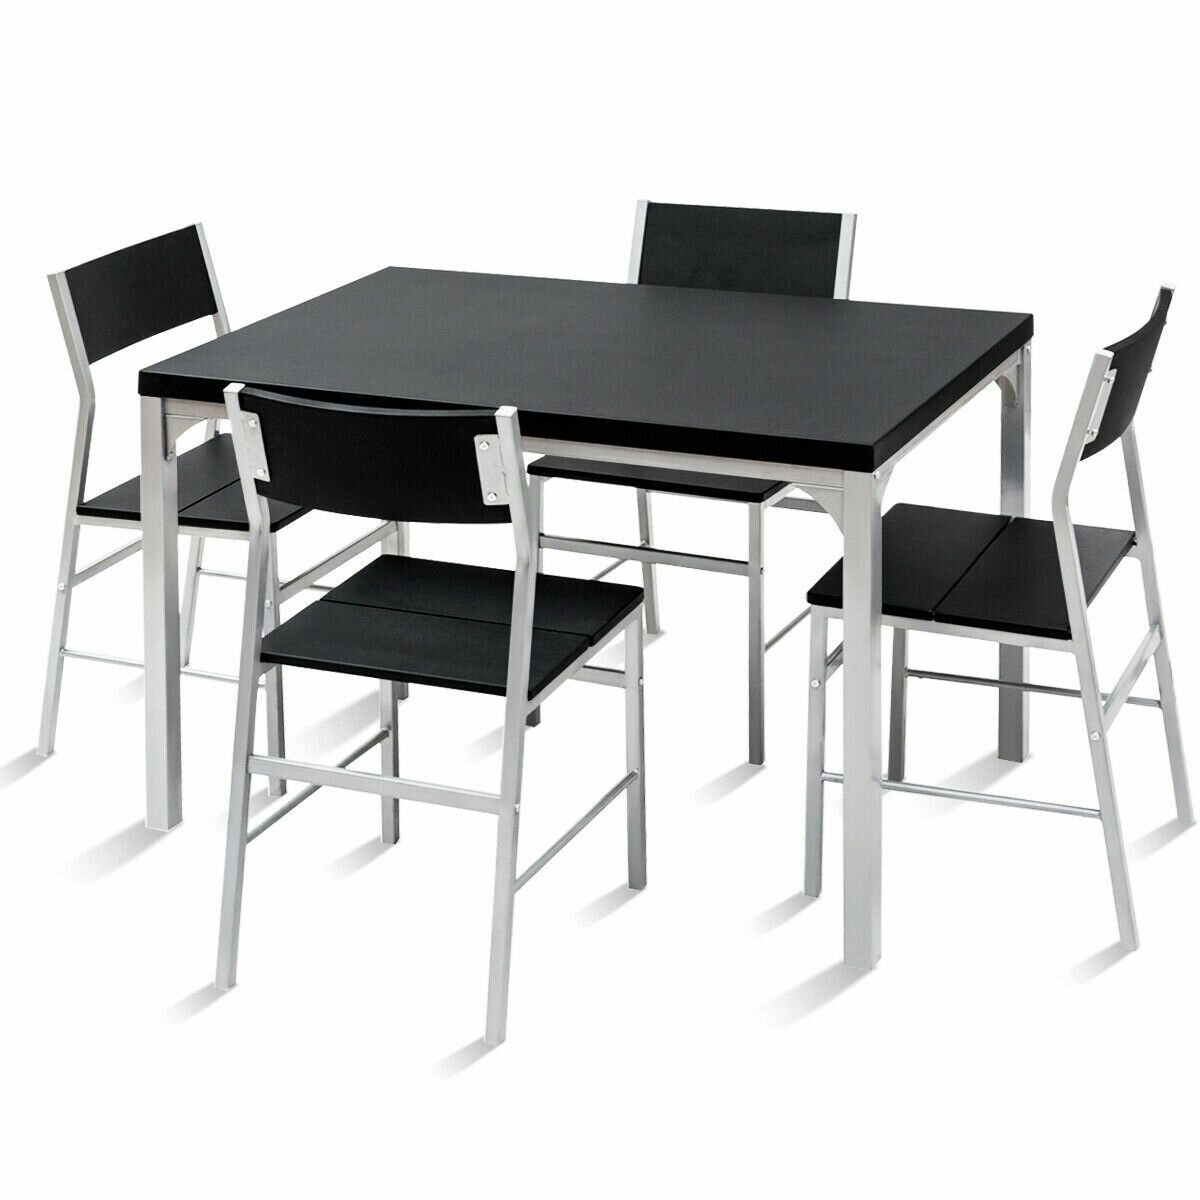 Catalina 5 Piece Dining Set With Most Current Kieffer 5 Piece Dining Sets (View 12 of 20)